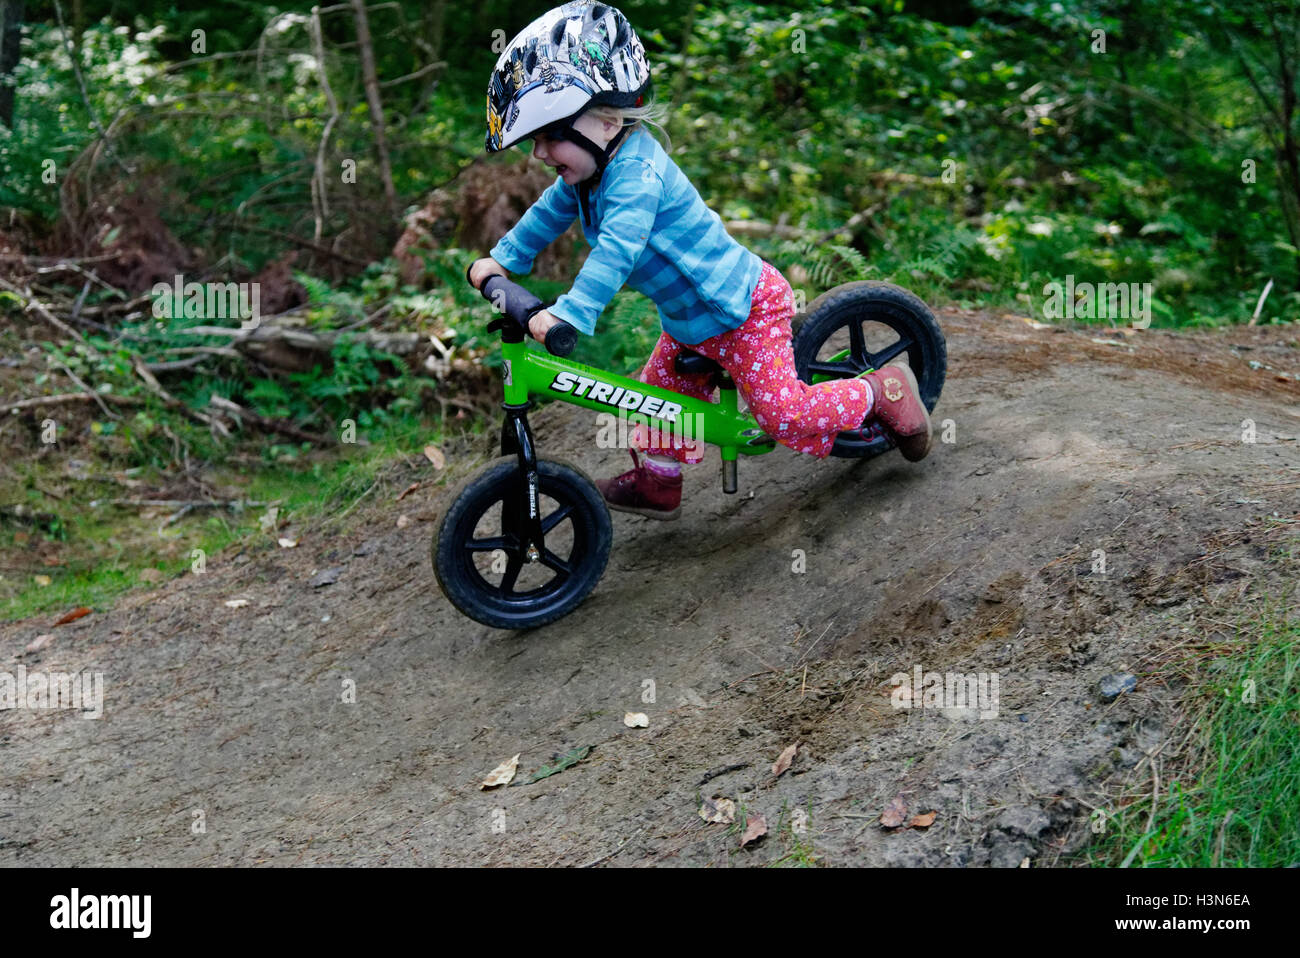 A two year old girl on a balance bike on a pump track. Taken on Leapfrog pump track at Kingdom Trails Vermont Stock Photo